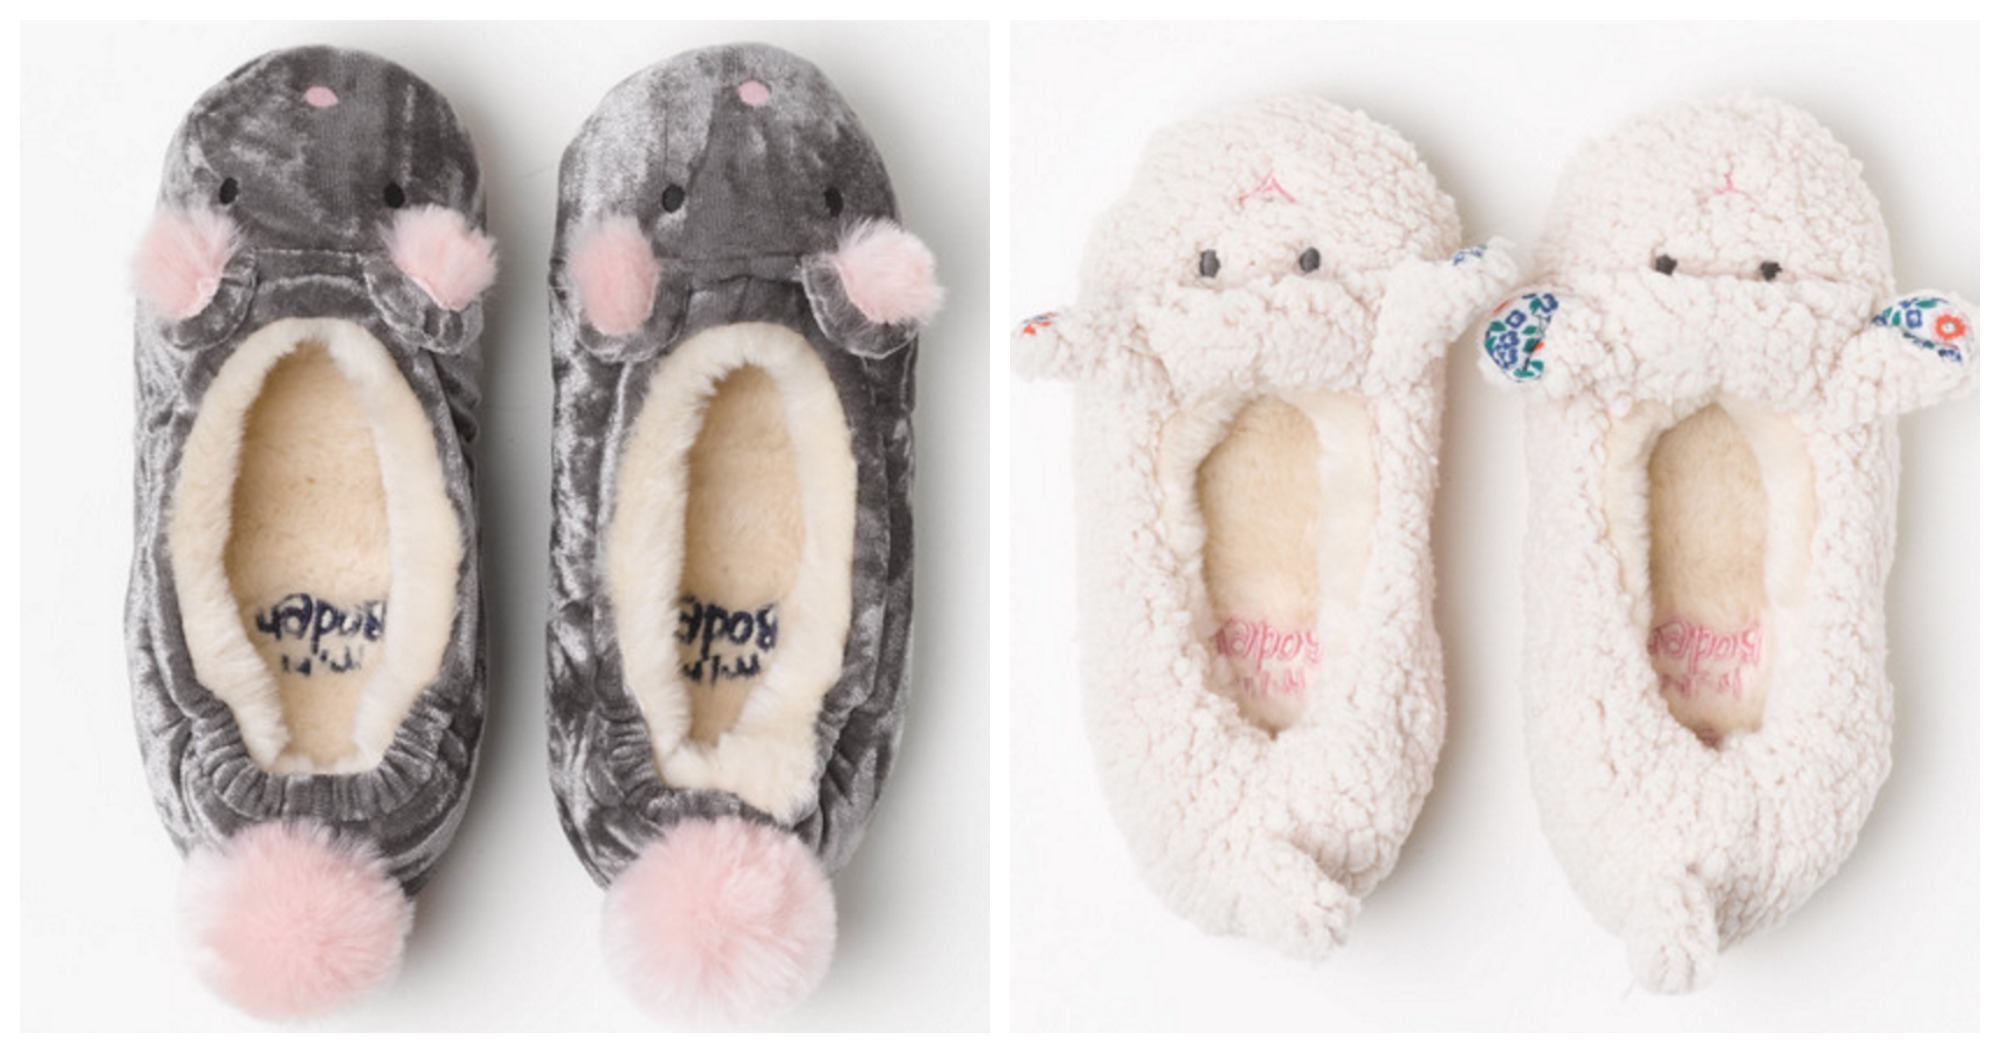 slippers from Boden